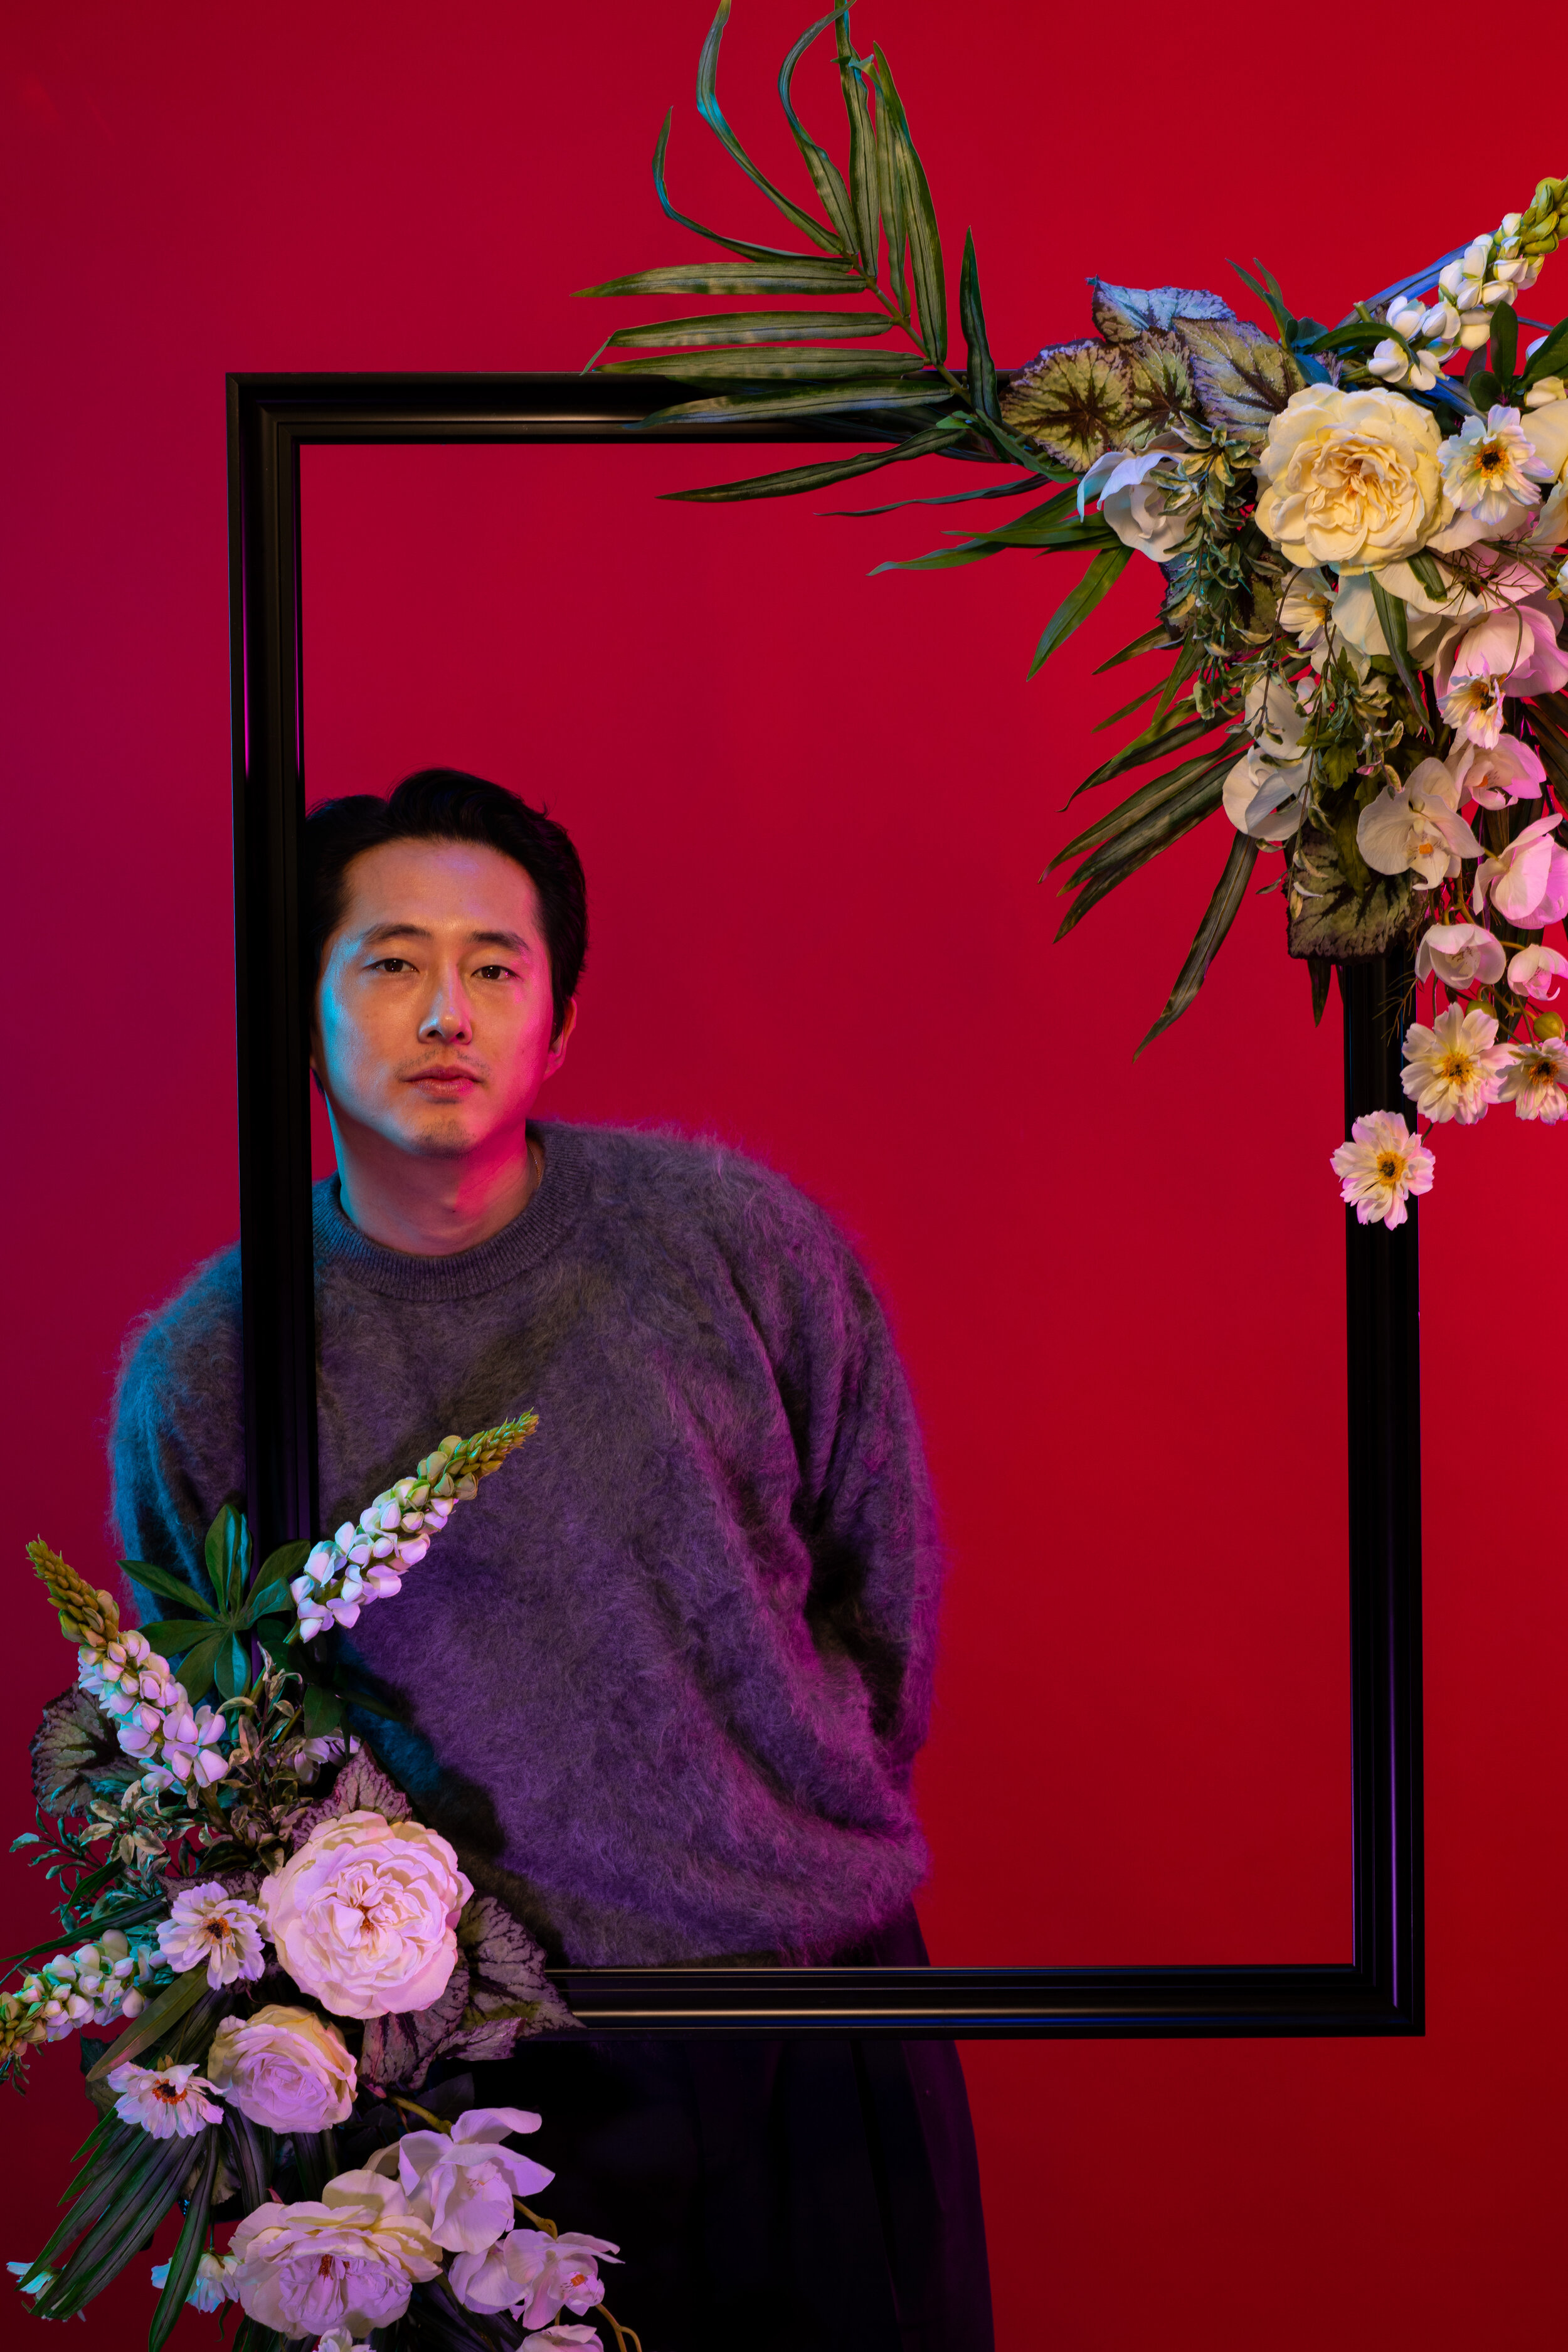  Actor Steven Yeun is photographed  in promotion of the film, “Minari,” in the driveway, of a Pasadena, CA, home, on Wednesday, Nov. 11, 2020. Yeun portrays the father of a Korean-American family that moves to a tiny farm in Arkansas in search of bet